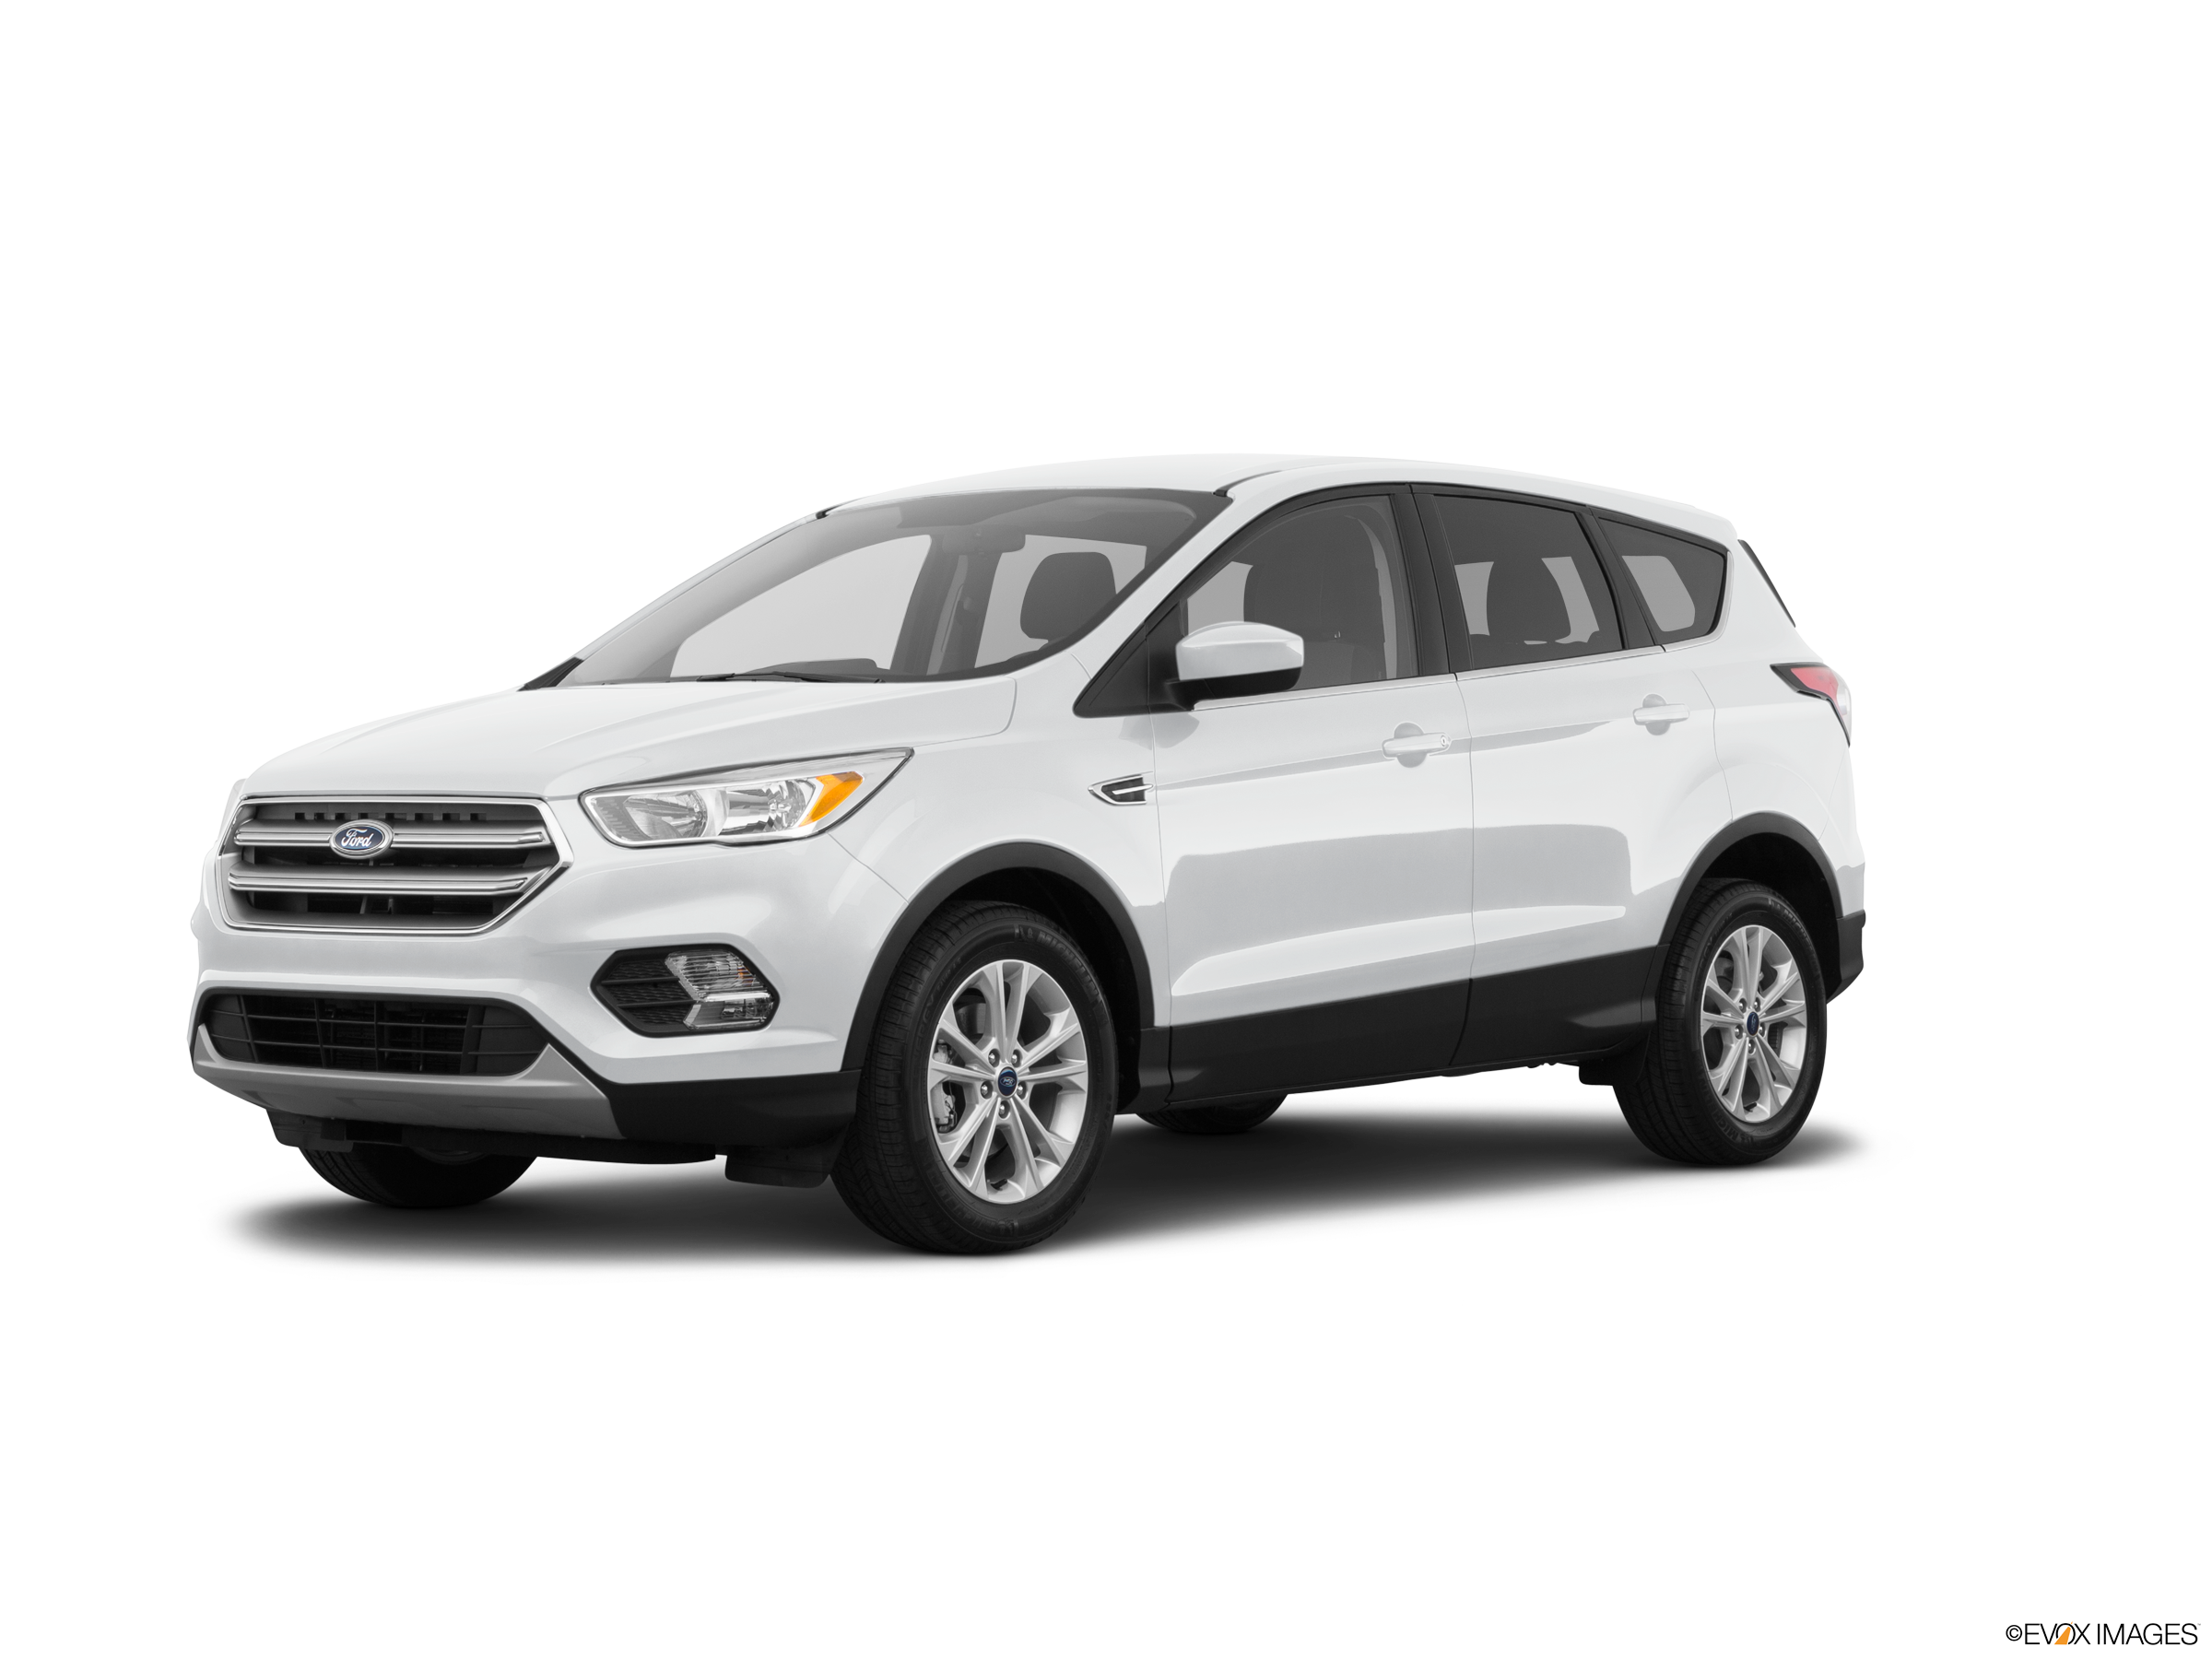 2017 Ford Escape Price, Value, Ratings & Reviews